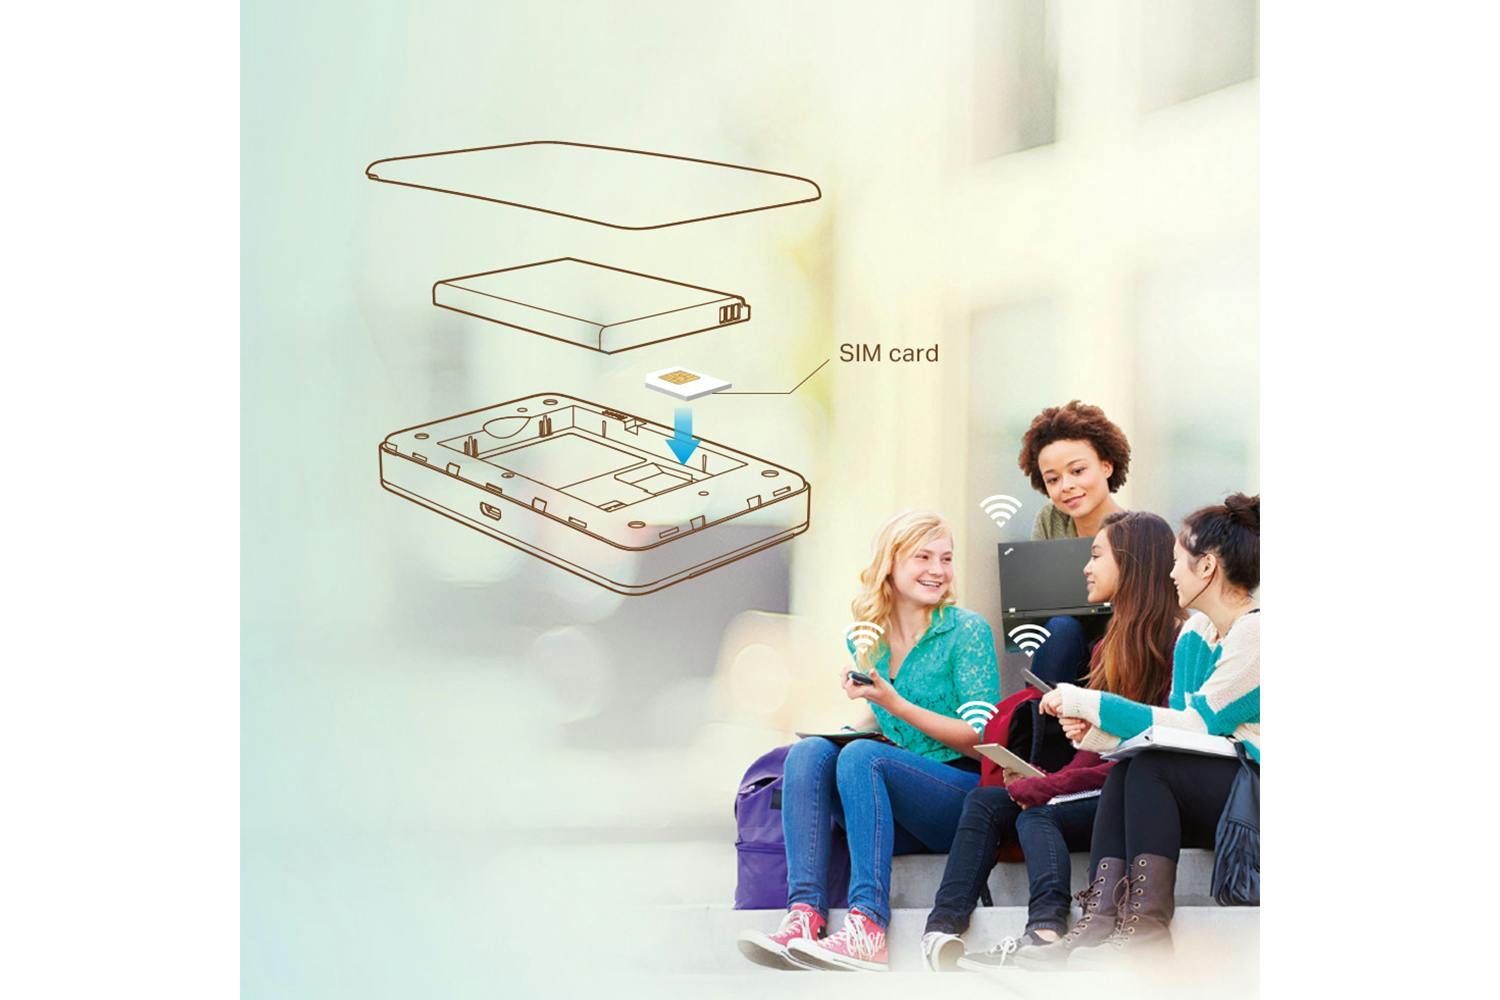 TP-LINK M7350 - The source for WiFi products at best prices in Europe 